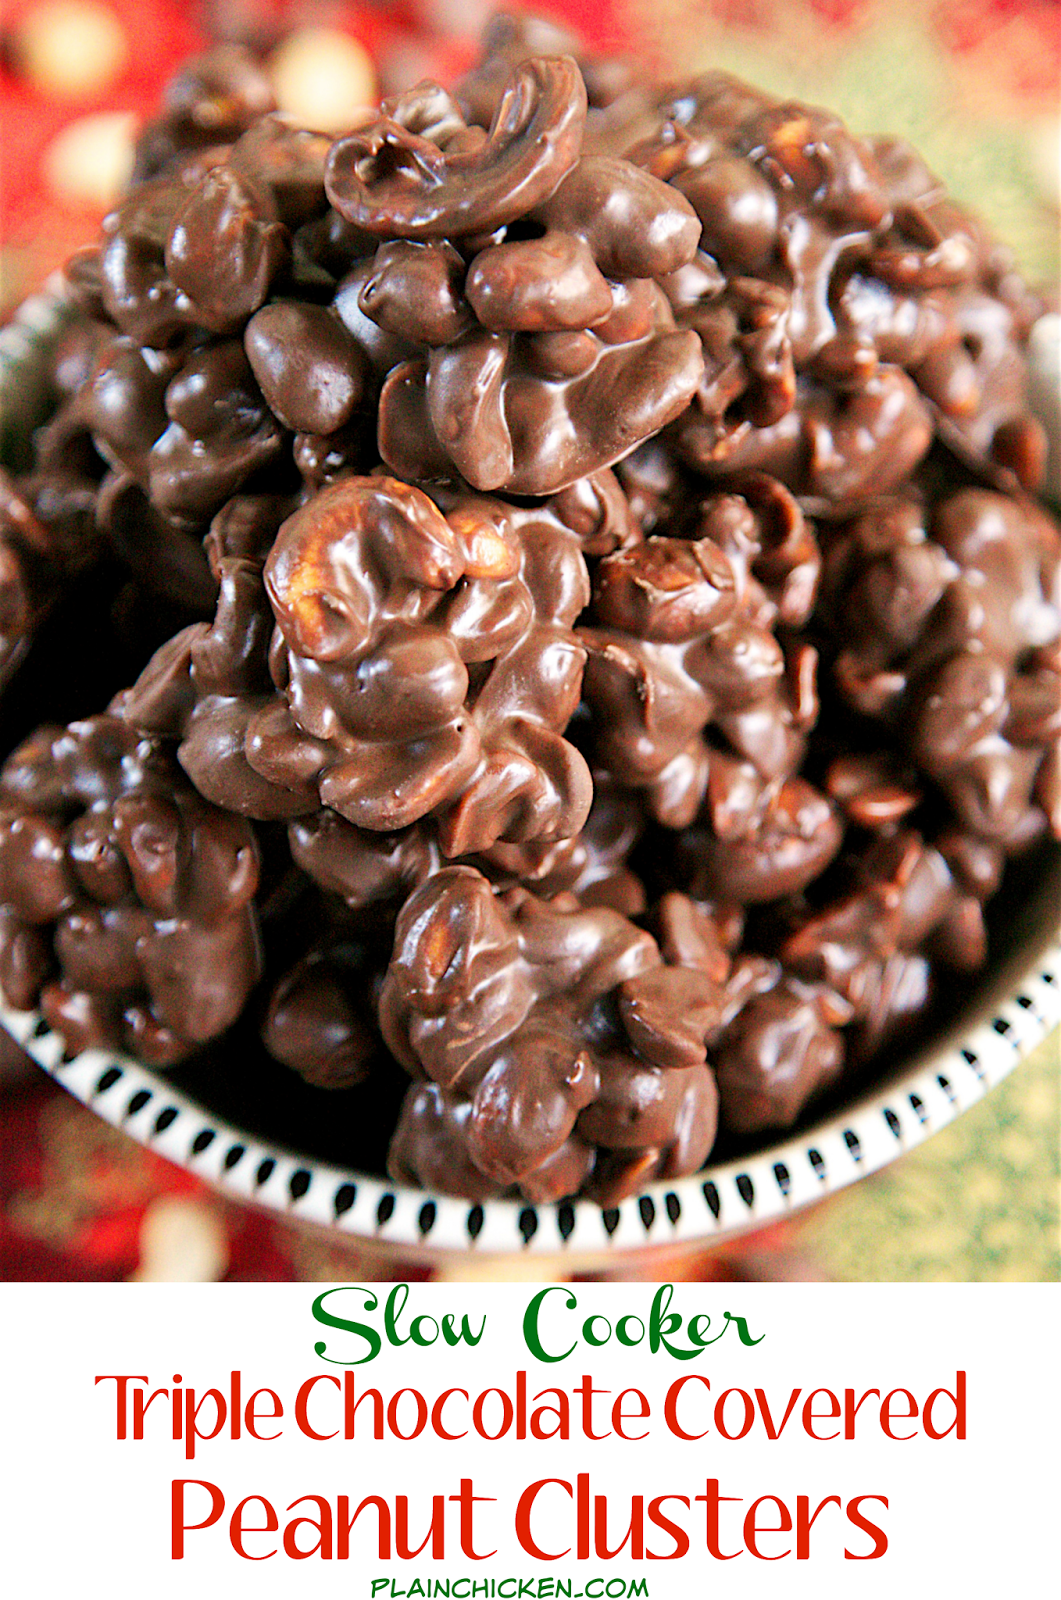 Slow Cooker Triple Chocolate Covered Peanut Clusters | Plain Chicken®